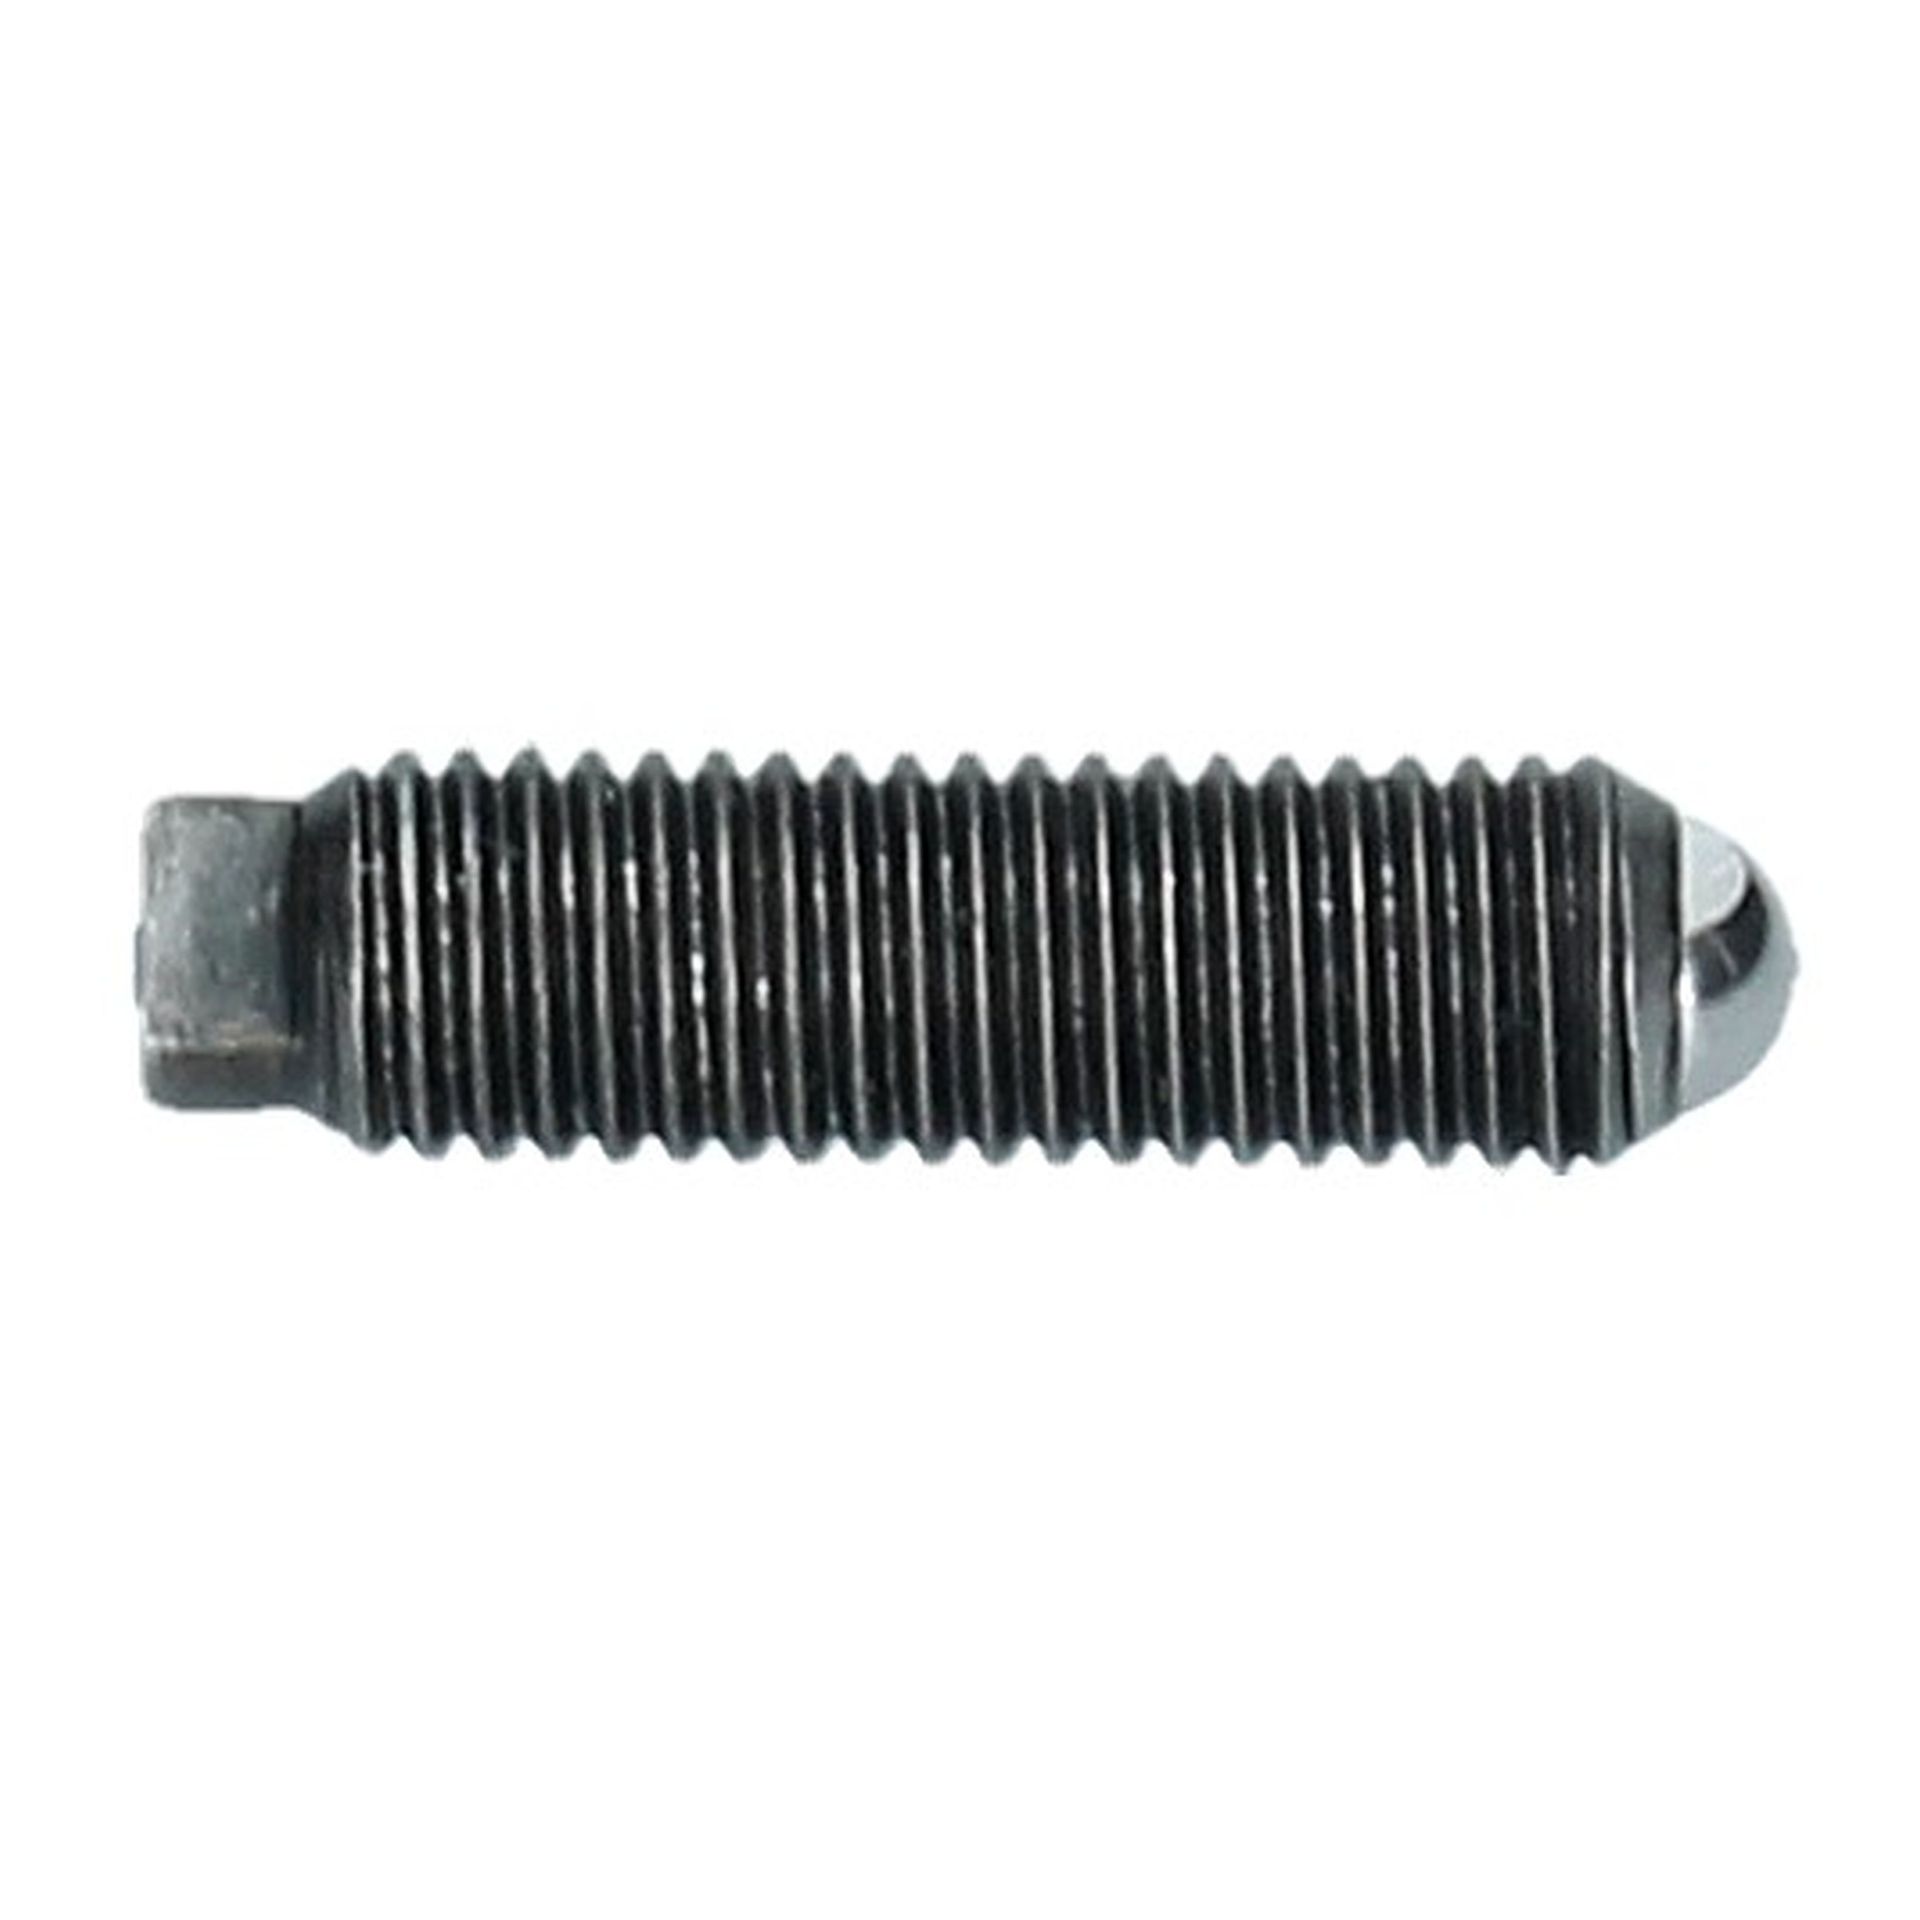 Tappet Screw Ball-End